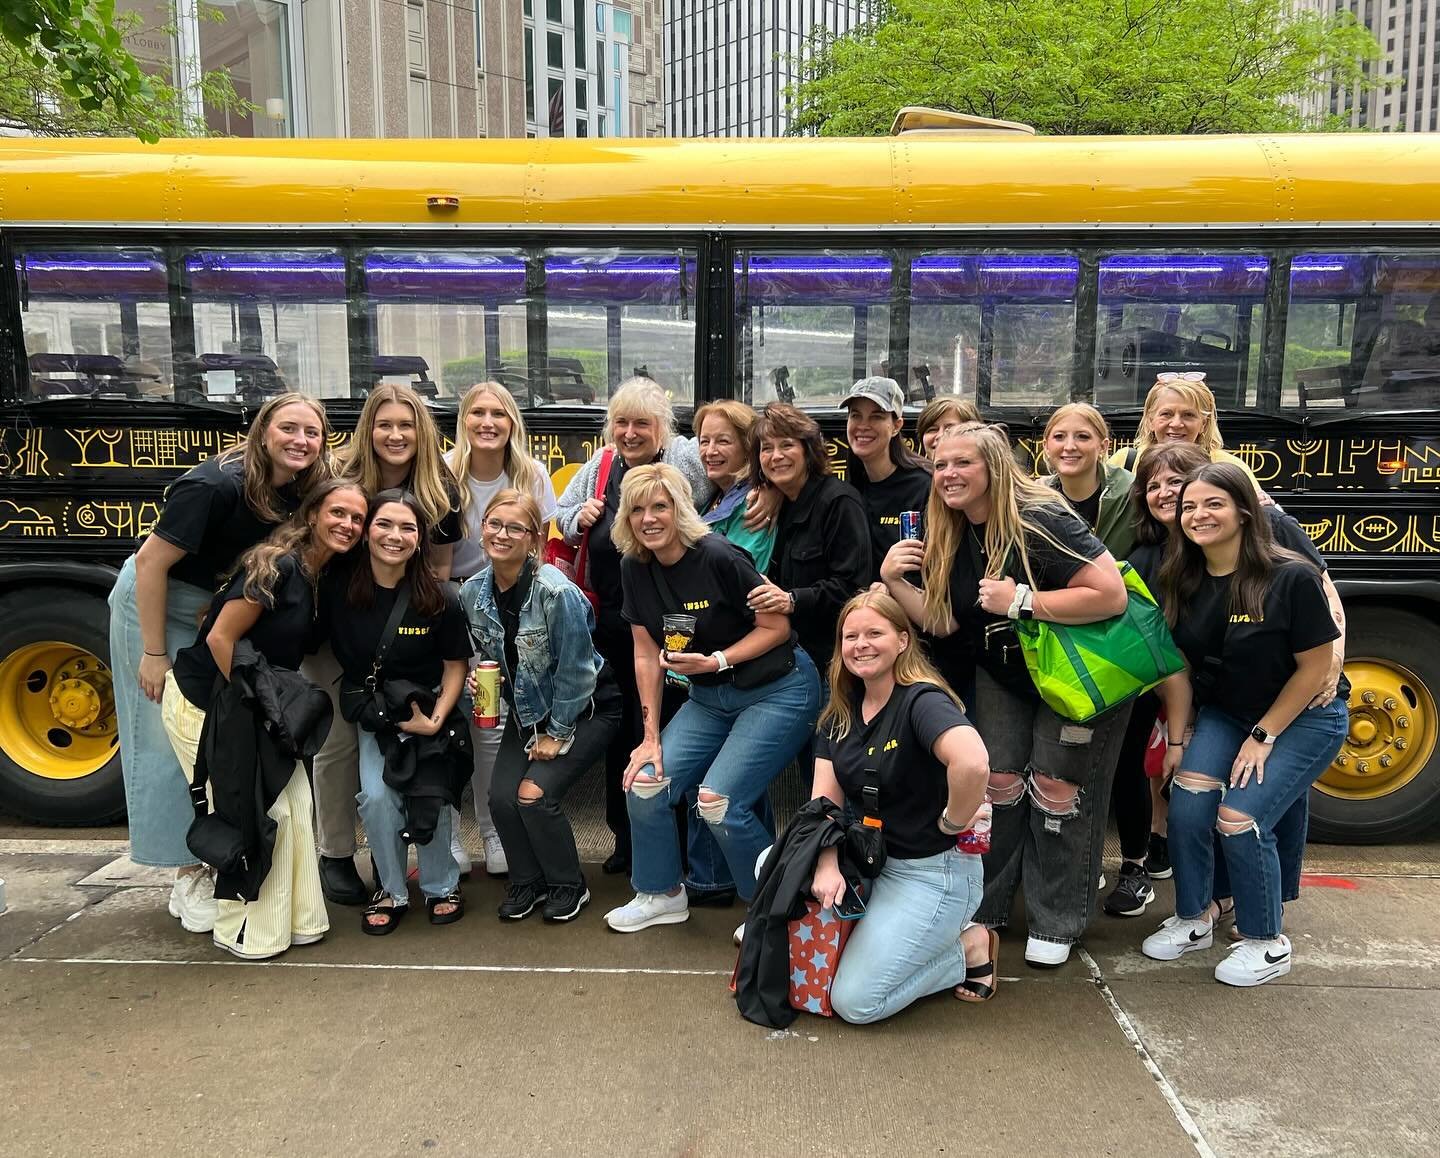 We absolutely love to host private events on the bus&hellip; especially bachelorette parties🥂💖🪩 Always a blast!!!

Book your next special event with us 🚌😎✌️